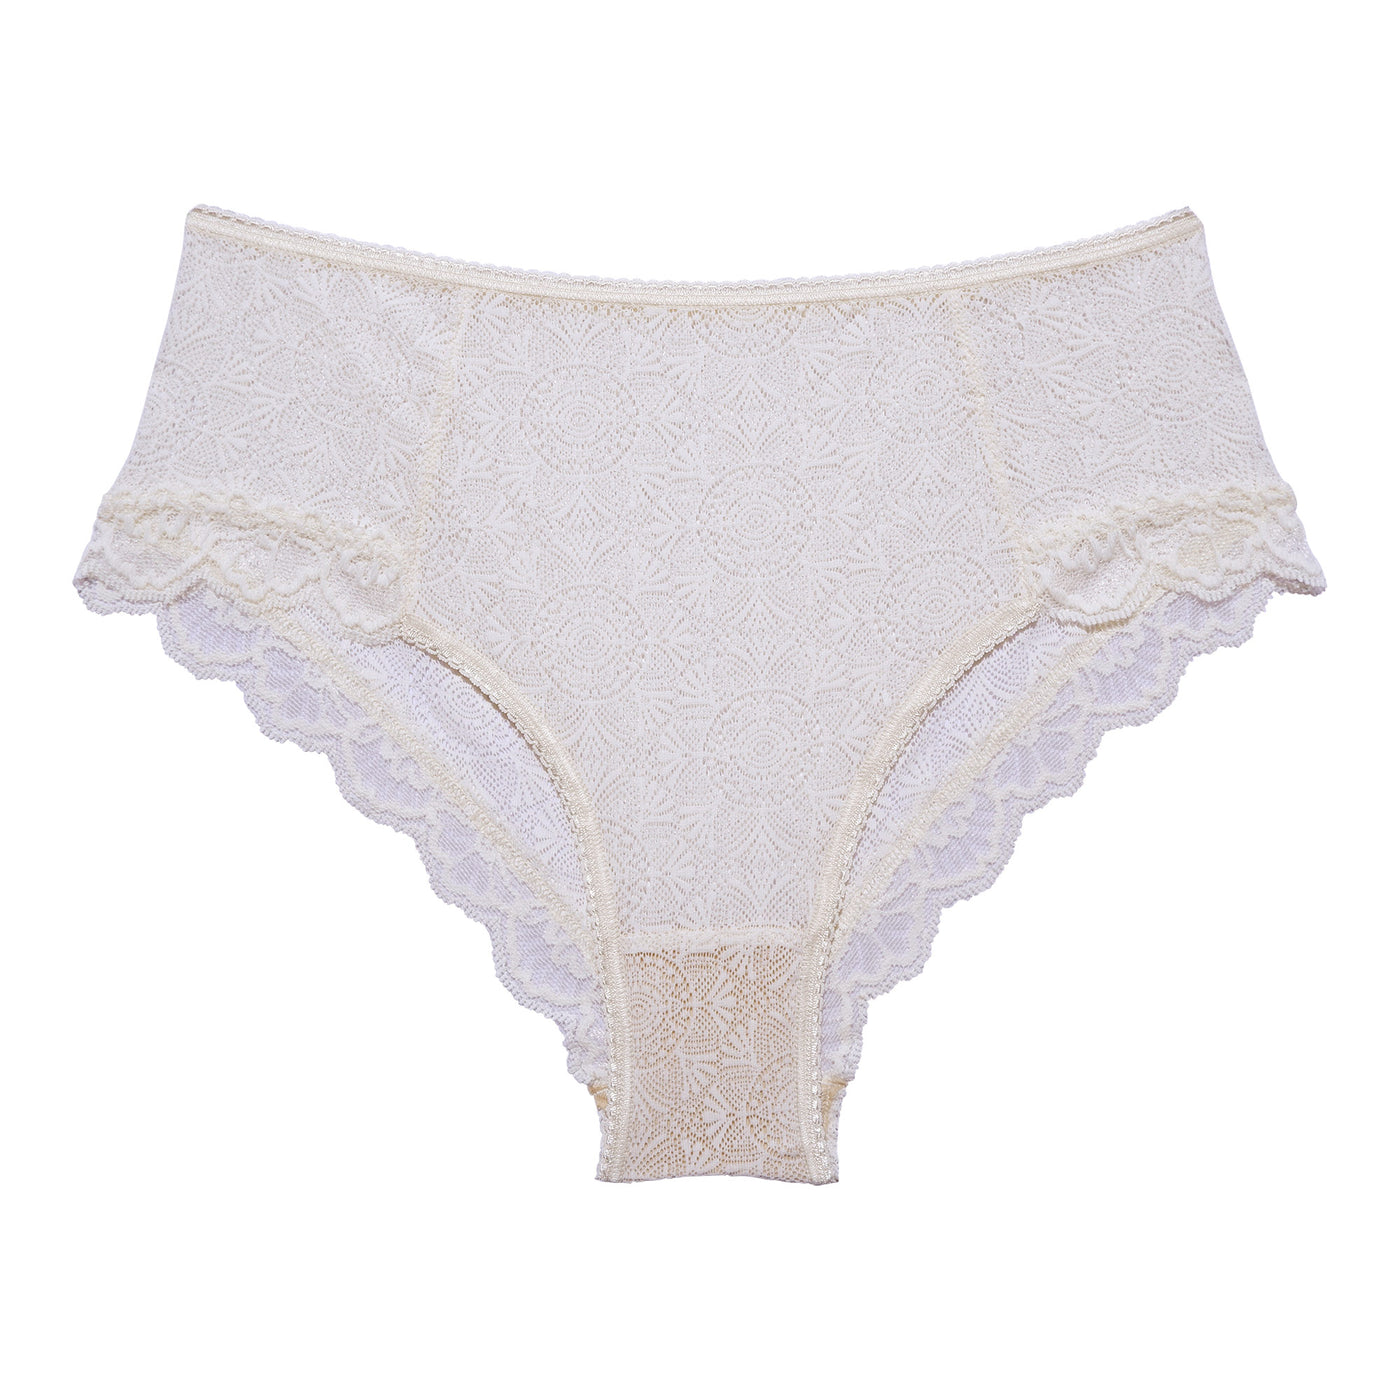 Underprotection Fabienne Hipsters Creme.